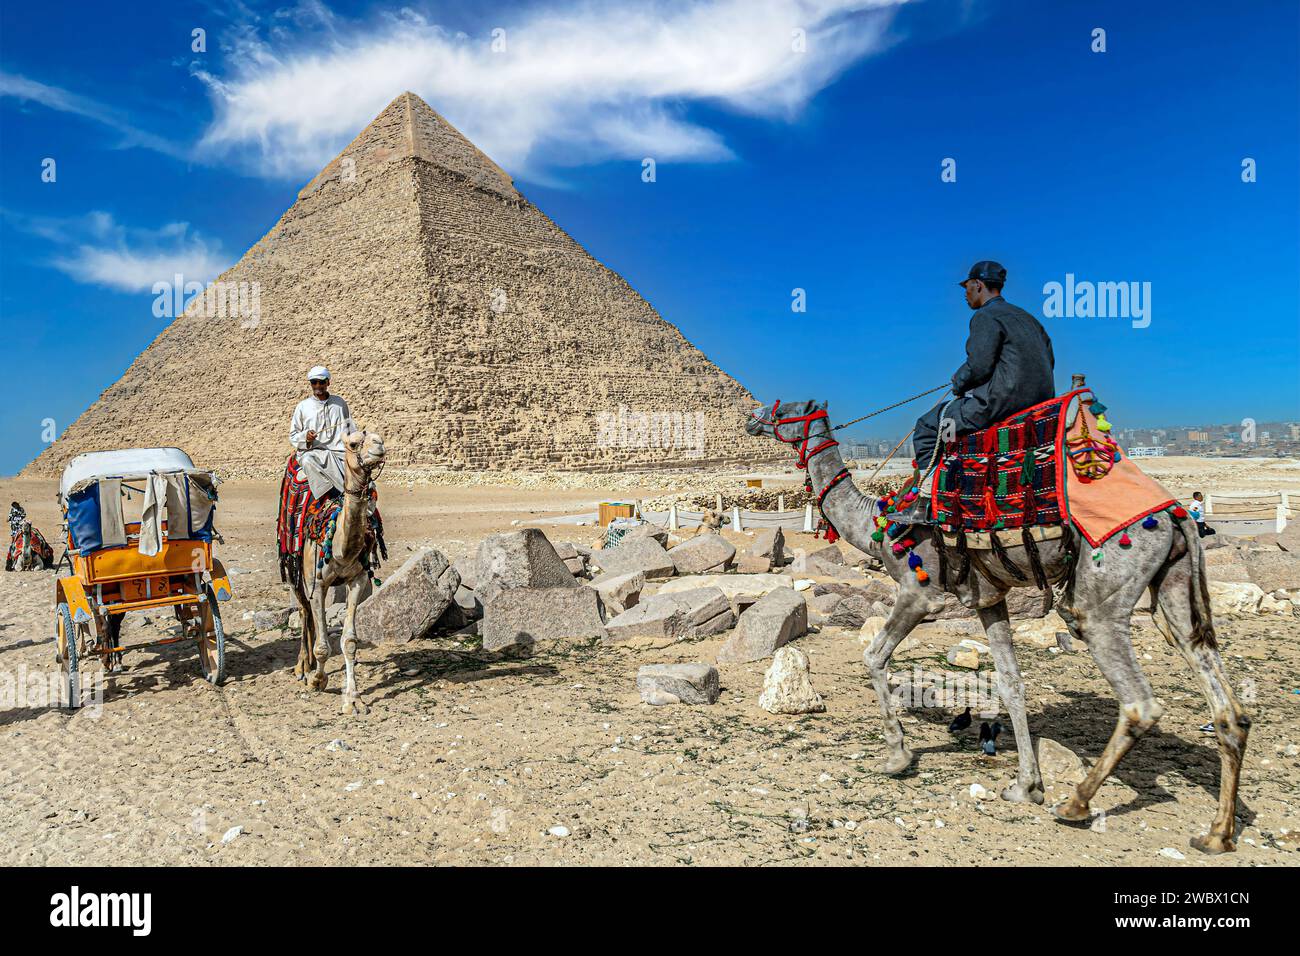 Giza Necropolis, Egypt - April 26, 2022: Bedouin men dressed in traditional clothes, ride camels decorated with specific embroidery. Stock Photo